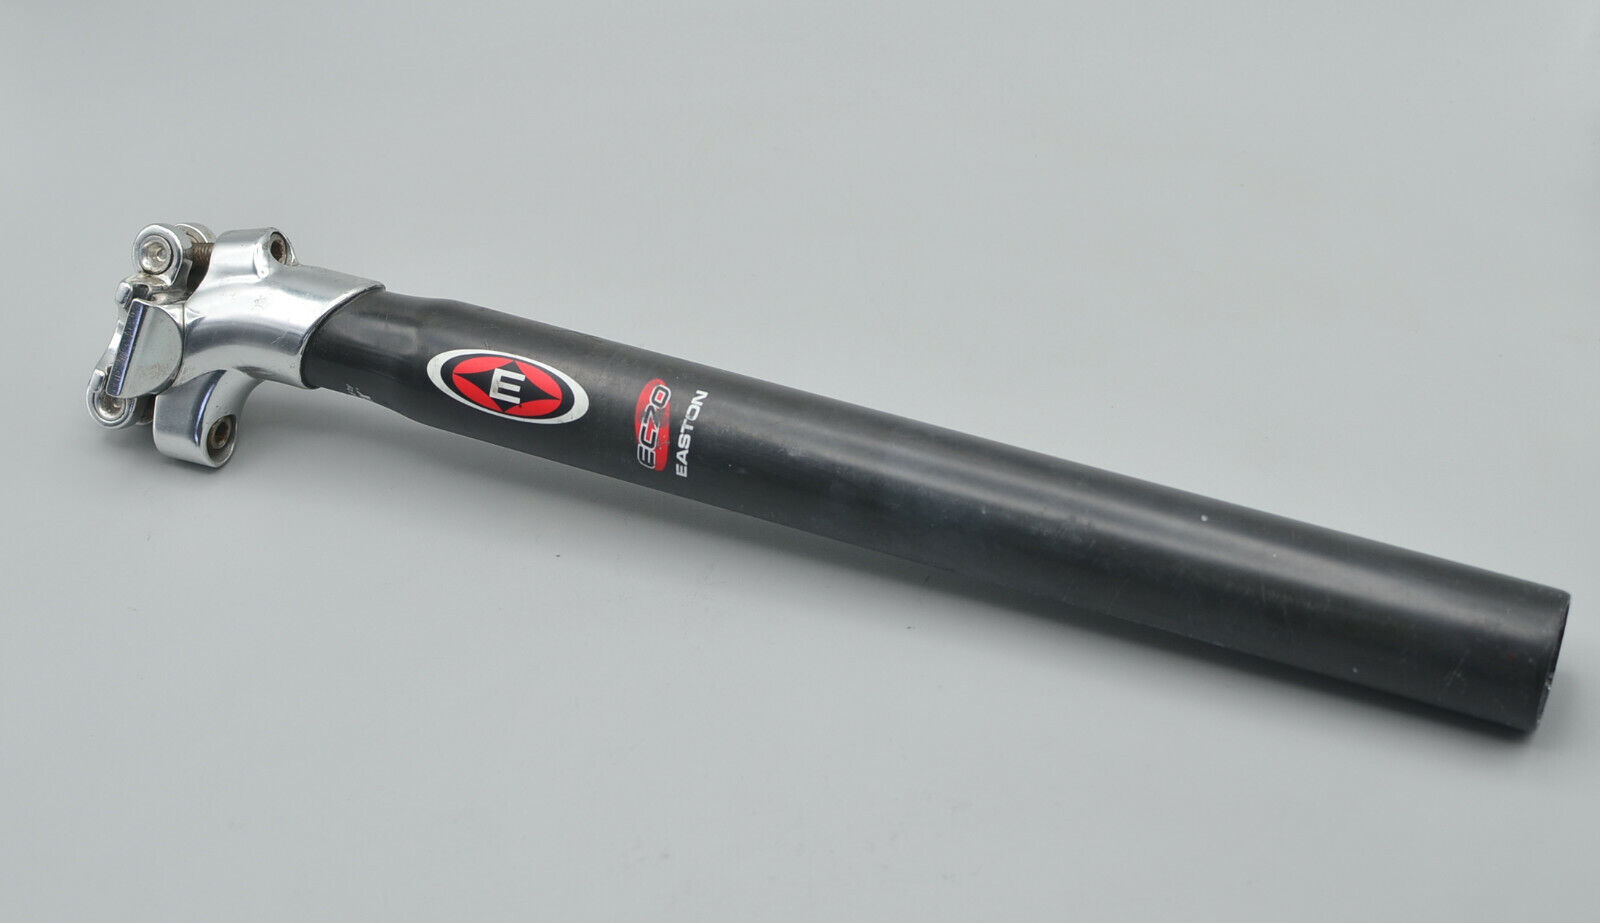 Easton Ec70 Carbon Seatpost With 0mm Setback 27.2 X 350mm for sale online |  eBay